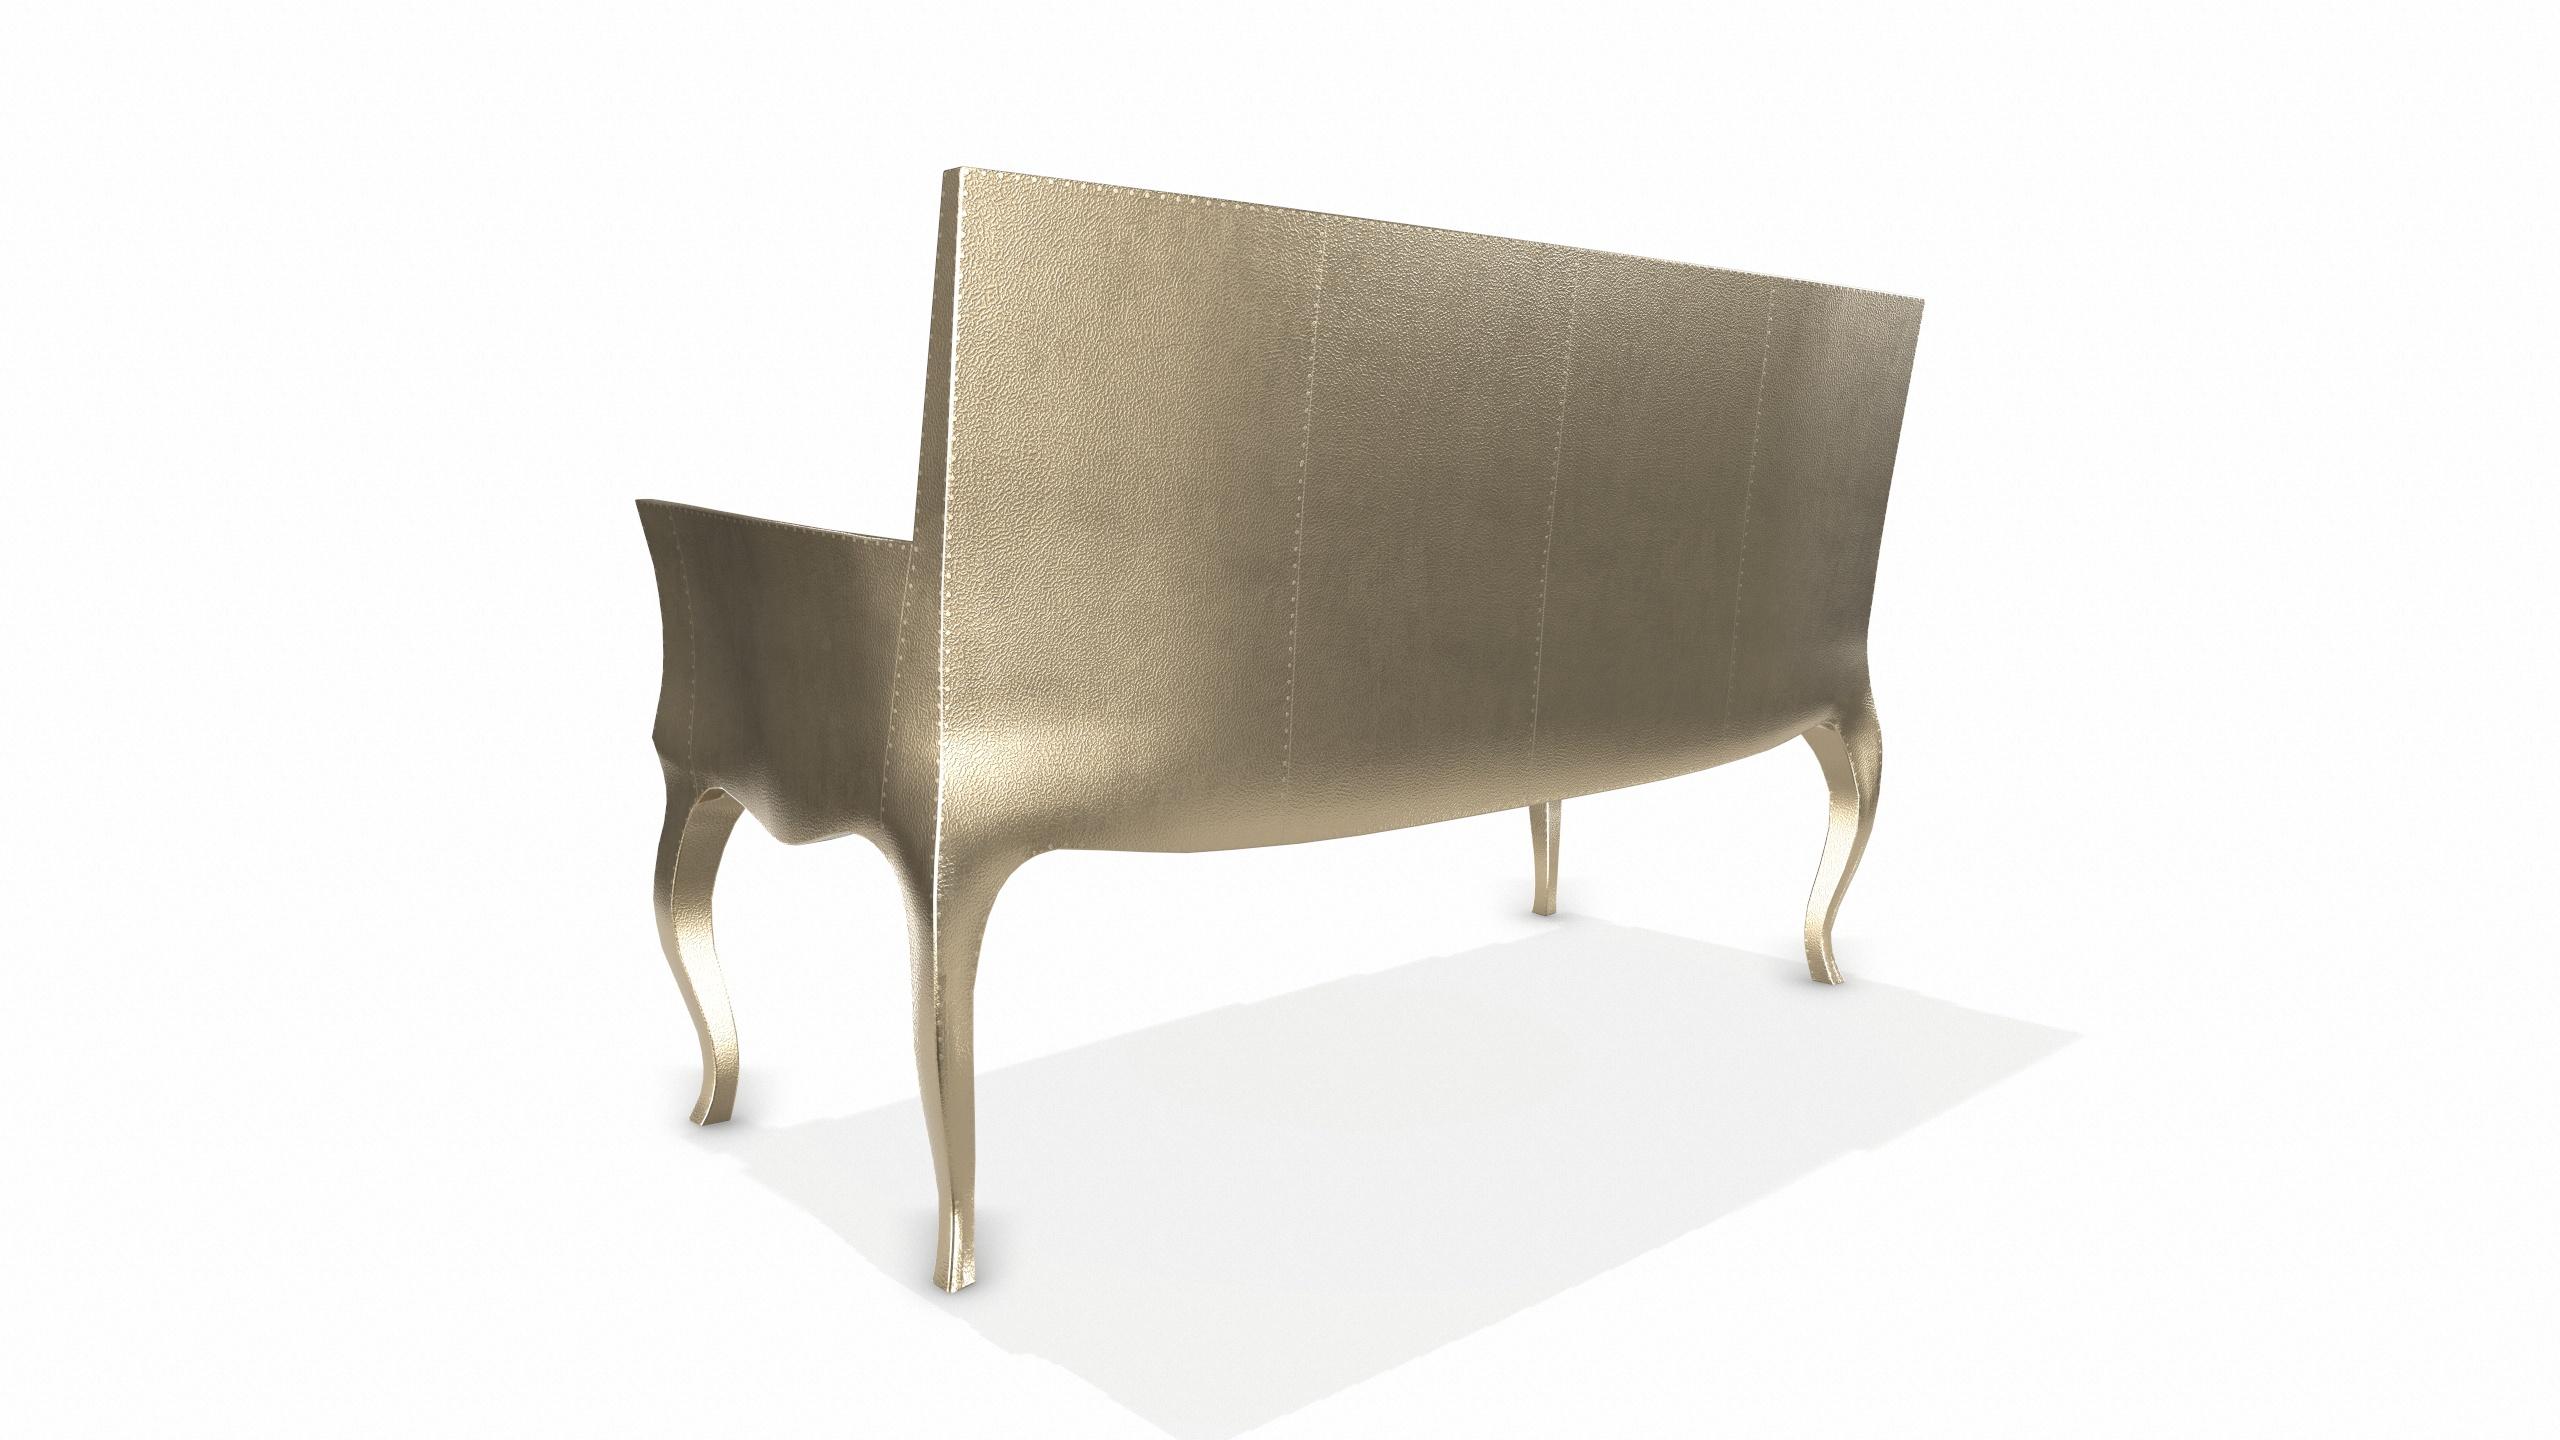 Other Louise Settee Art Deco Lounge Chairs in Fine Hammered Brass by Paul Mathieu For Sale